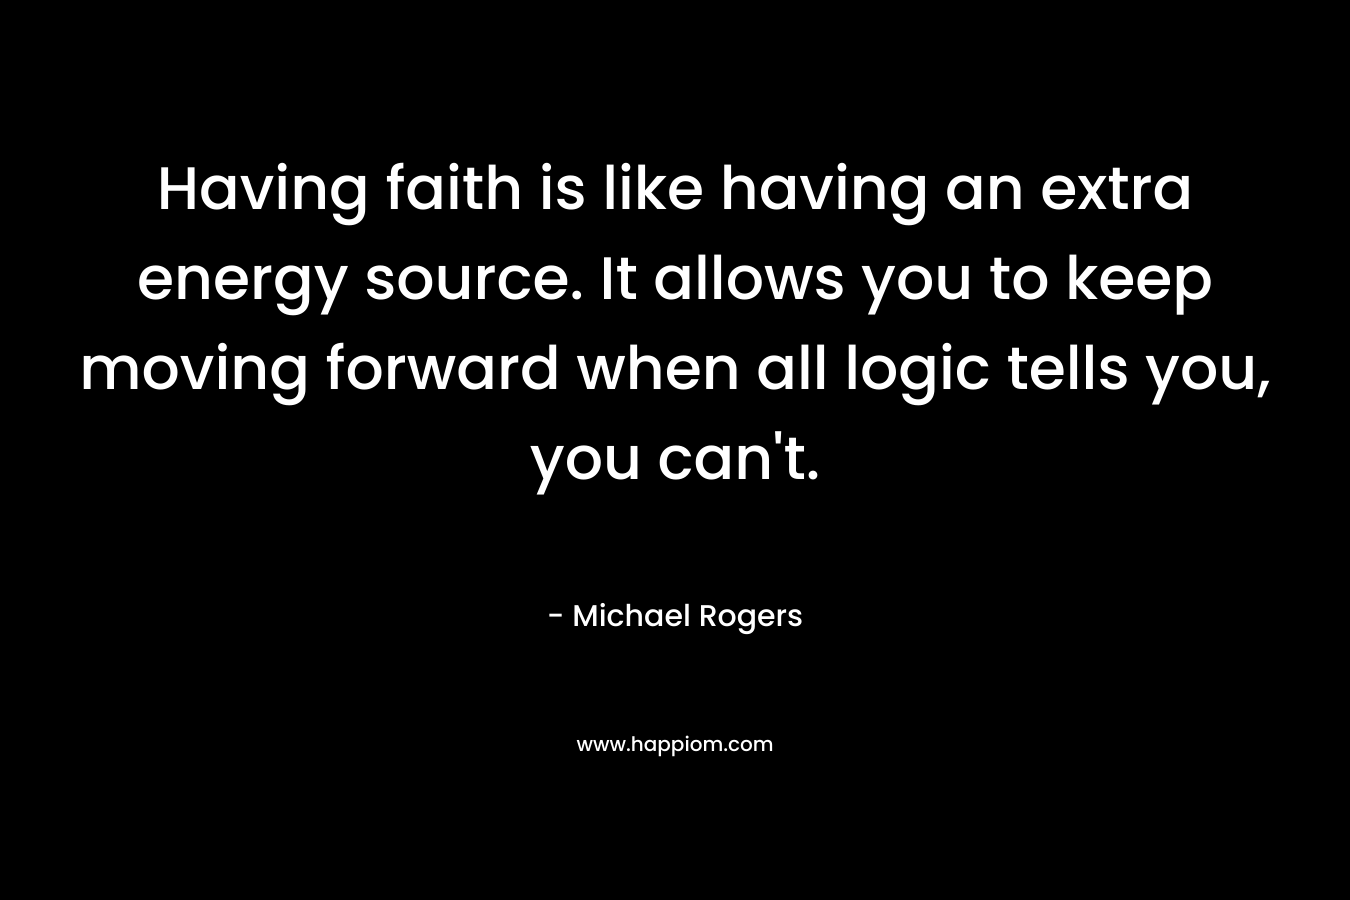 Having faith is like having an extra energy source. It allows you to keep moving forward when all logic tells you, you can't.